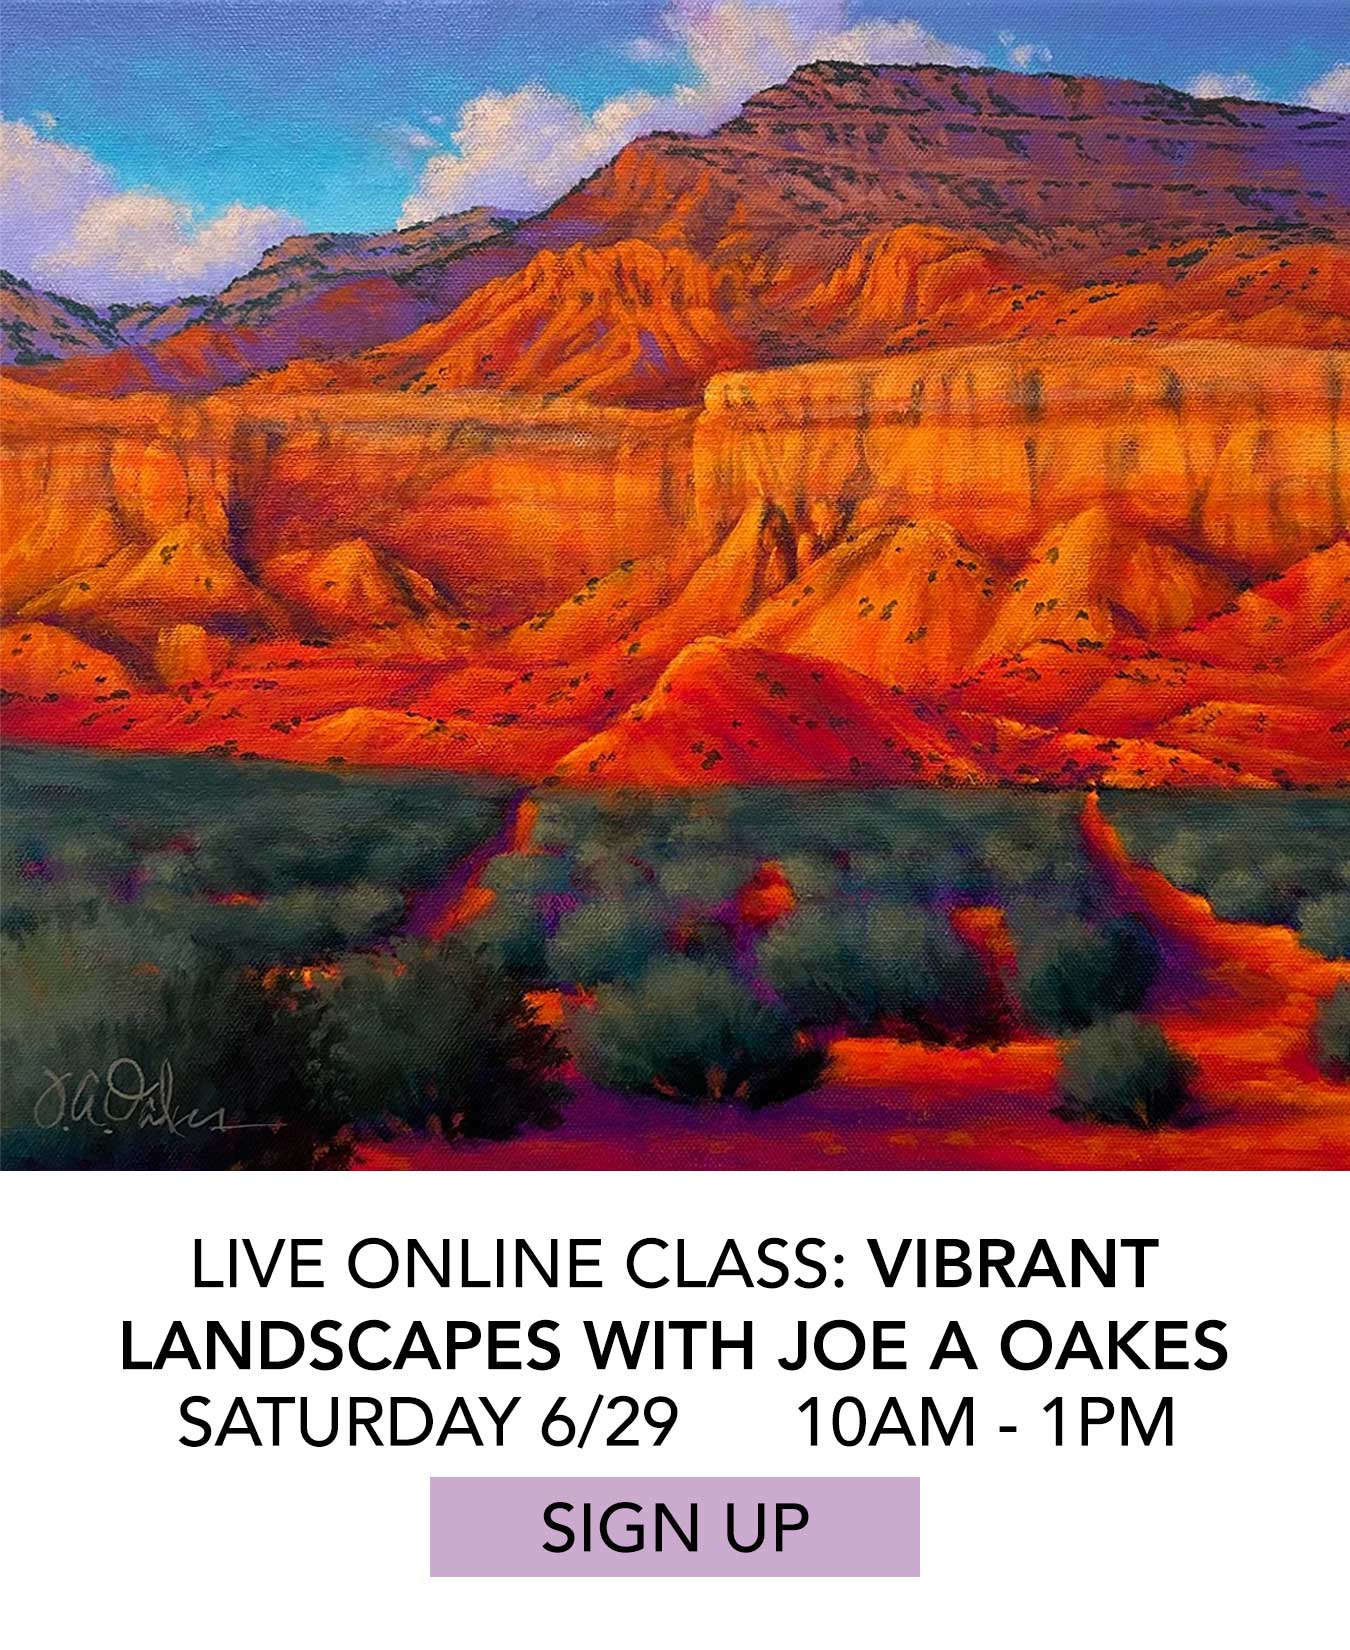 Live Online Class: Vibrant Landscapes with Joe A Oakes. Saturday 6/29 from 10:00am to 1:00pm. Click to Sign Up.